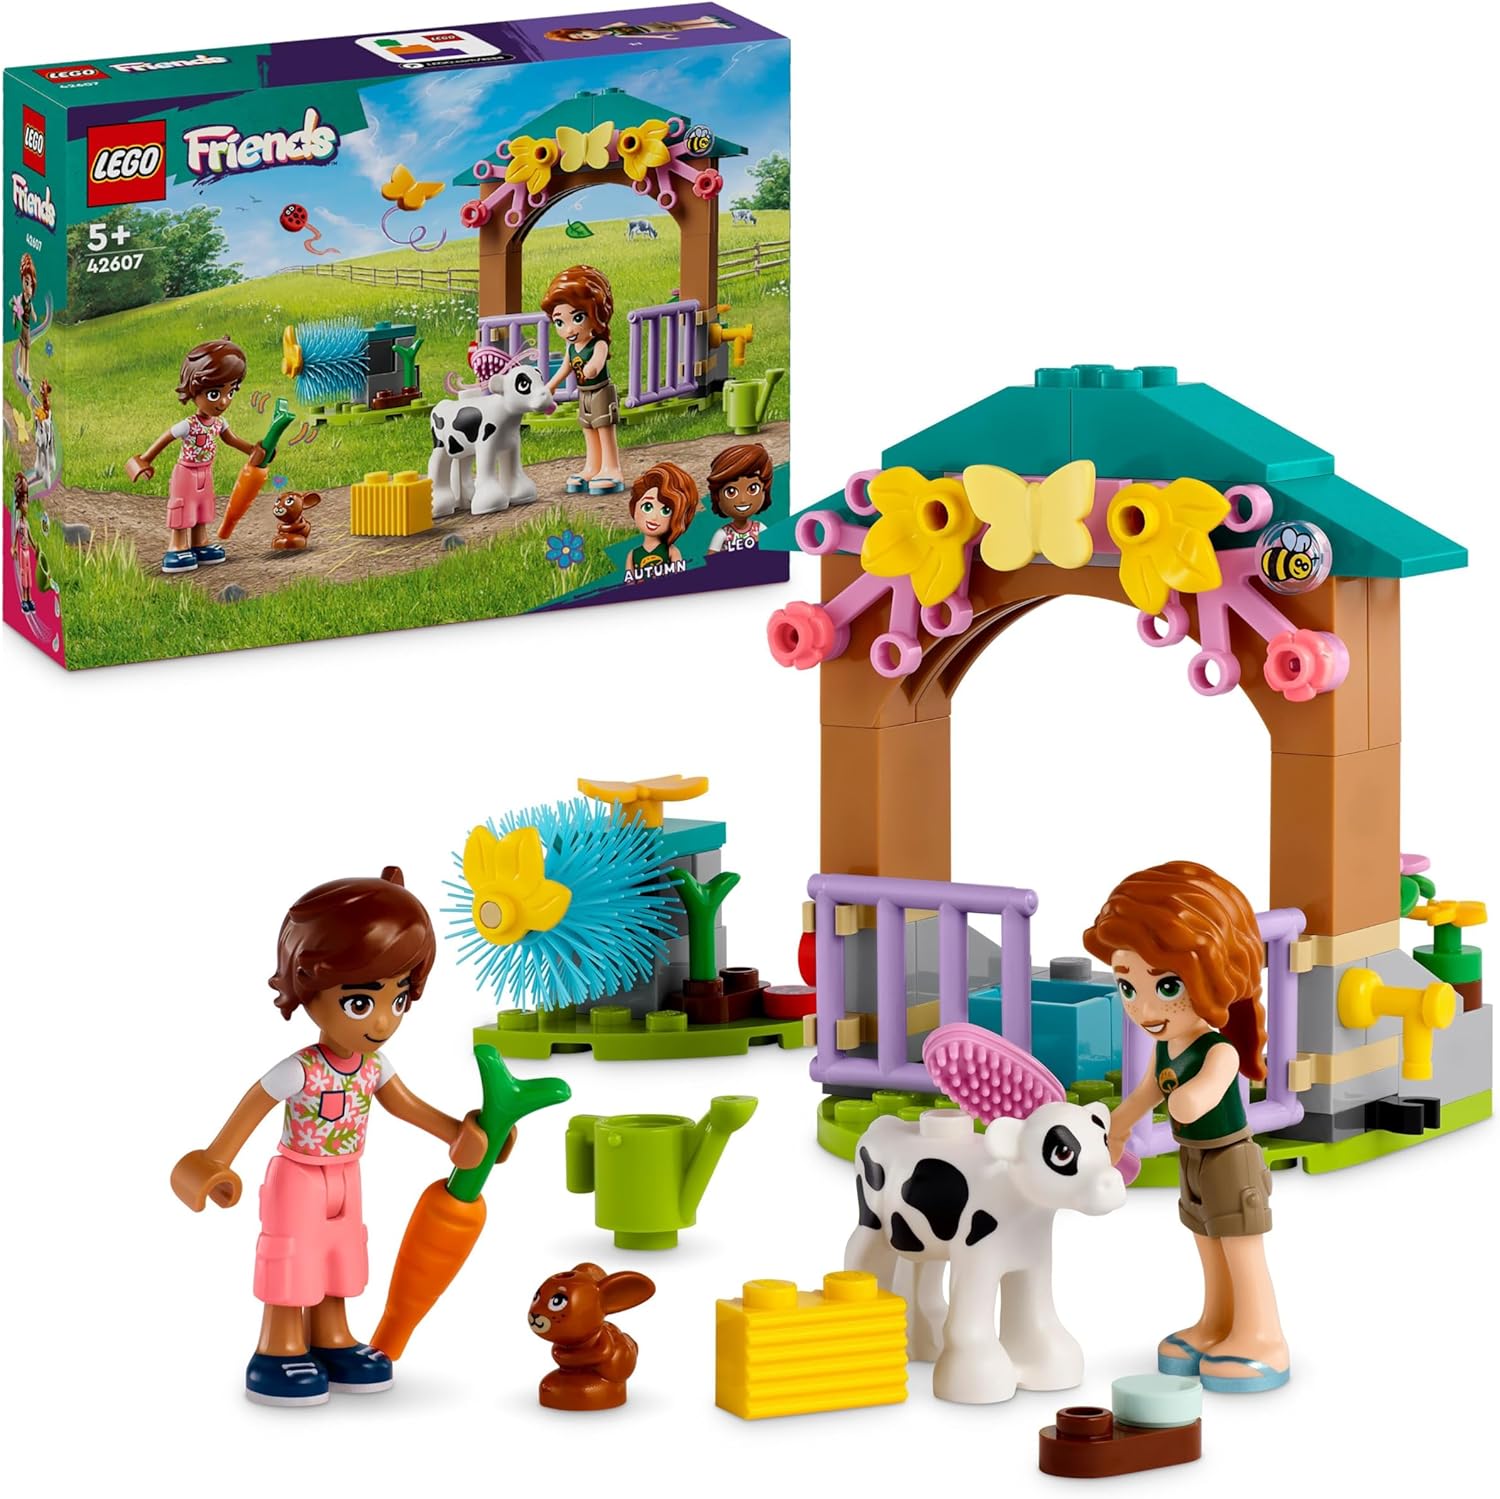 LEGO Friends Autumns Calf Hutch Farm Toy with Animals for Kids, Small Set of 2 Figures, Rabbit and Cow Figure, Gift for 5 Year Old Girls and Boys 42607